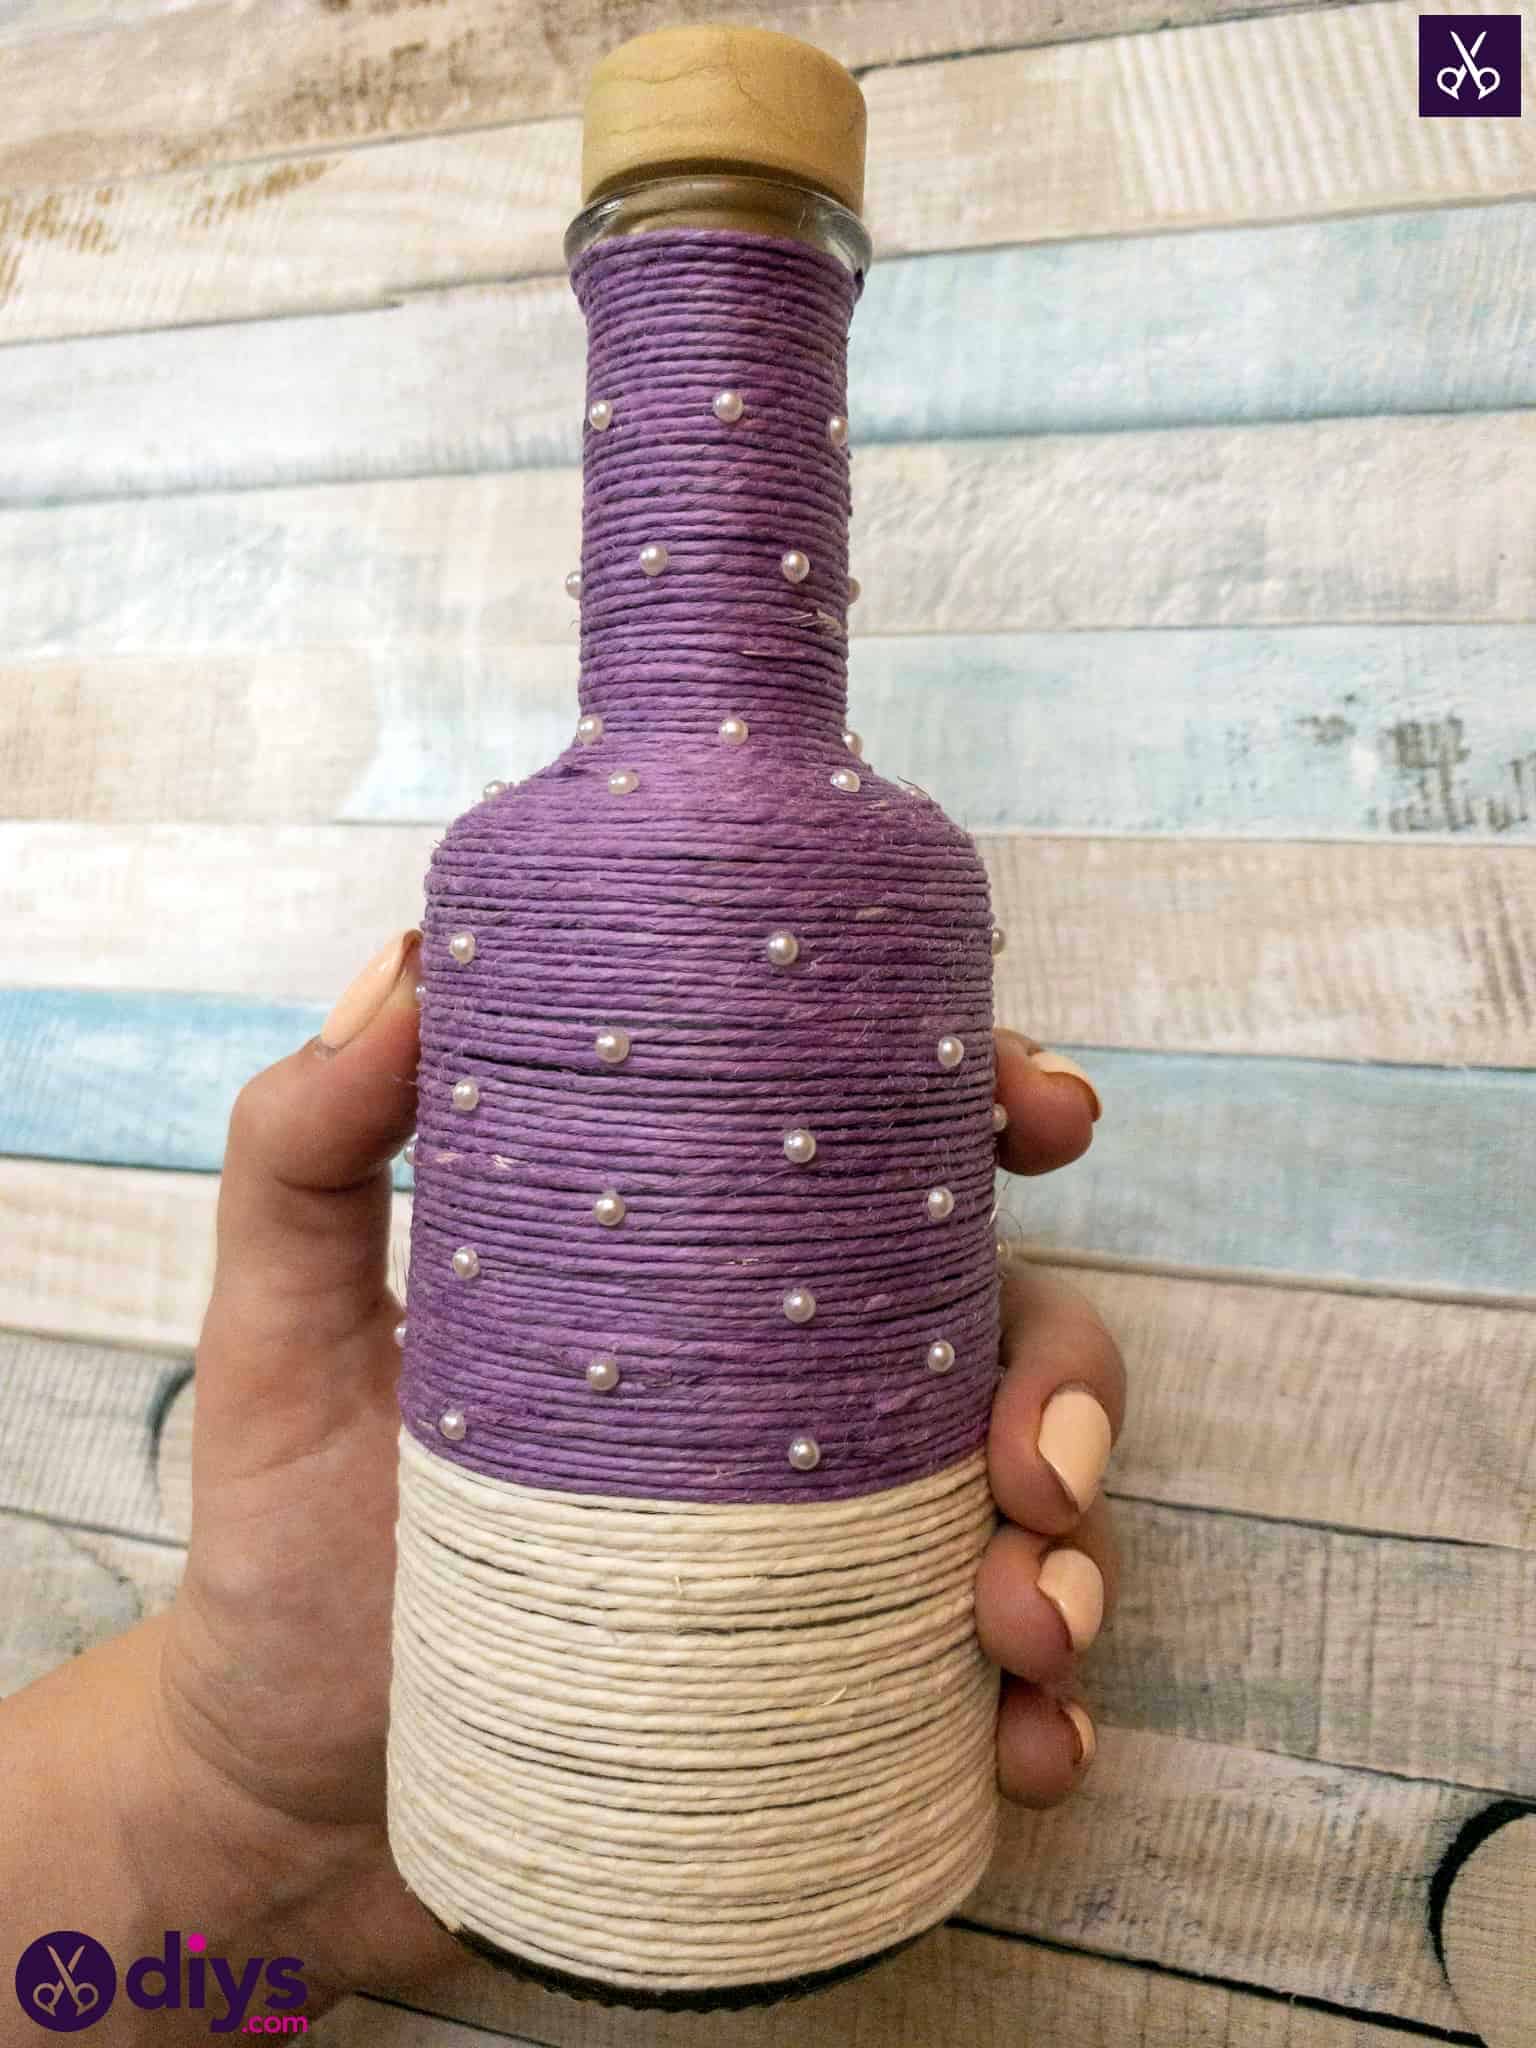 Twine wrapped bottle craft